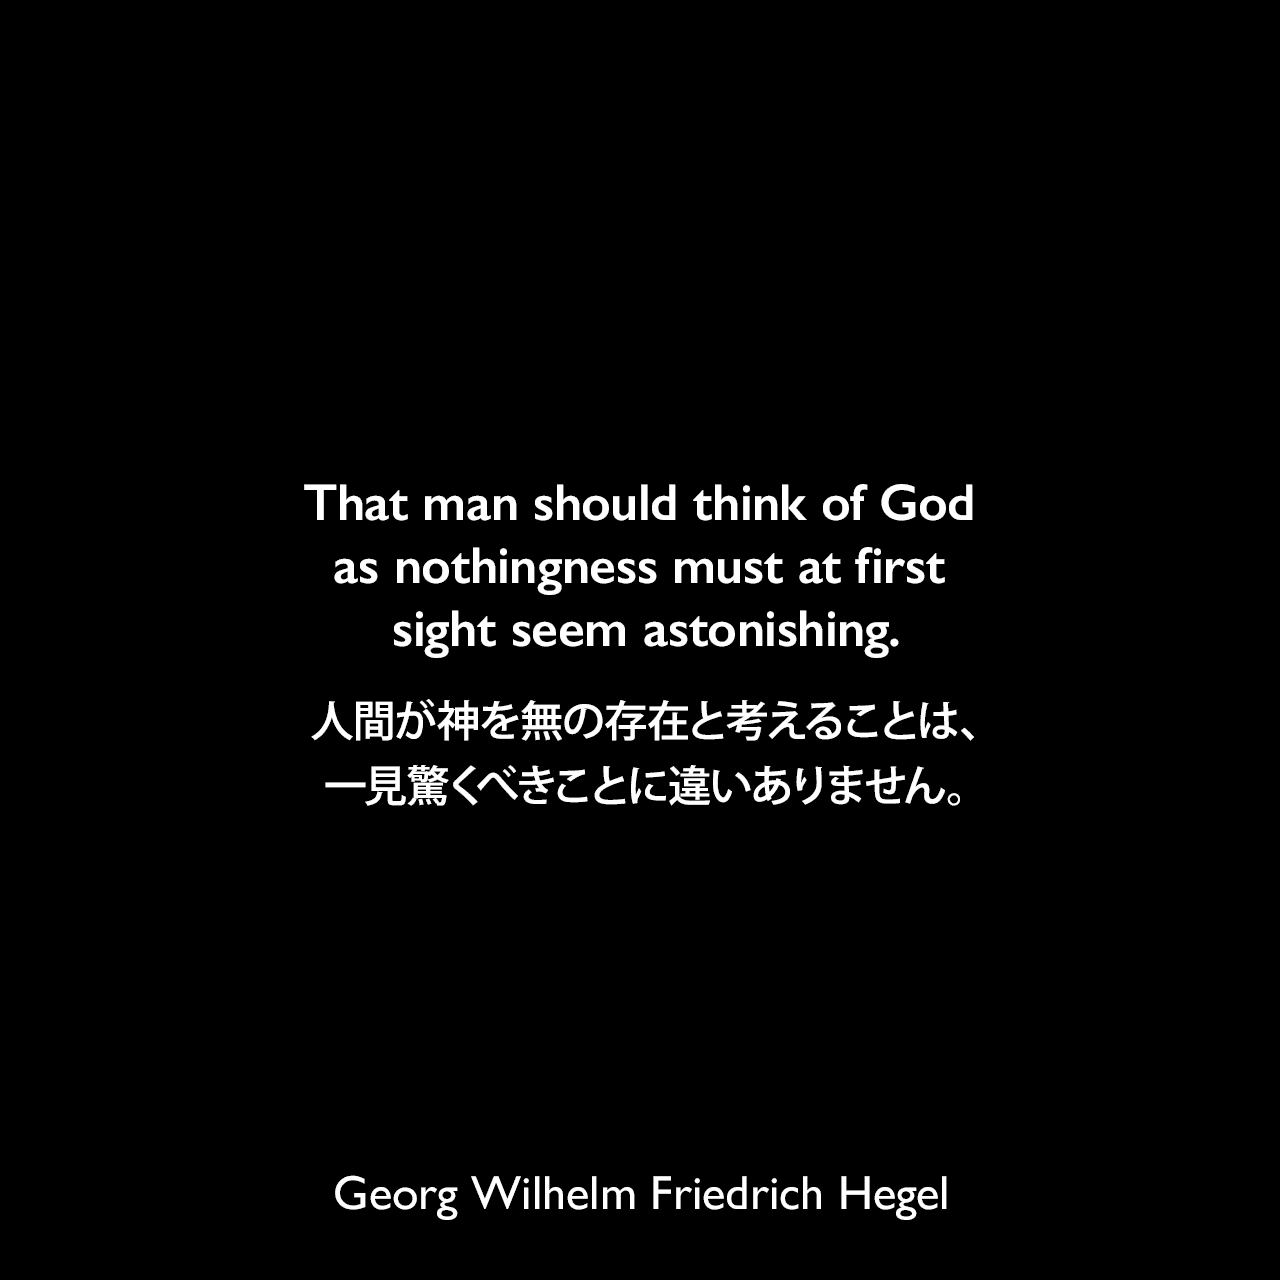 That man should think of God as nothingness must at first sight seem astonishing.人間が神を無の存在と考えることは、一見驚くべきことに違いありません。- ヘーゲルによる本「Lectures on the Philosophy of Religion」よりGeorg Wilhelm Friedrich Hegel